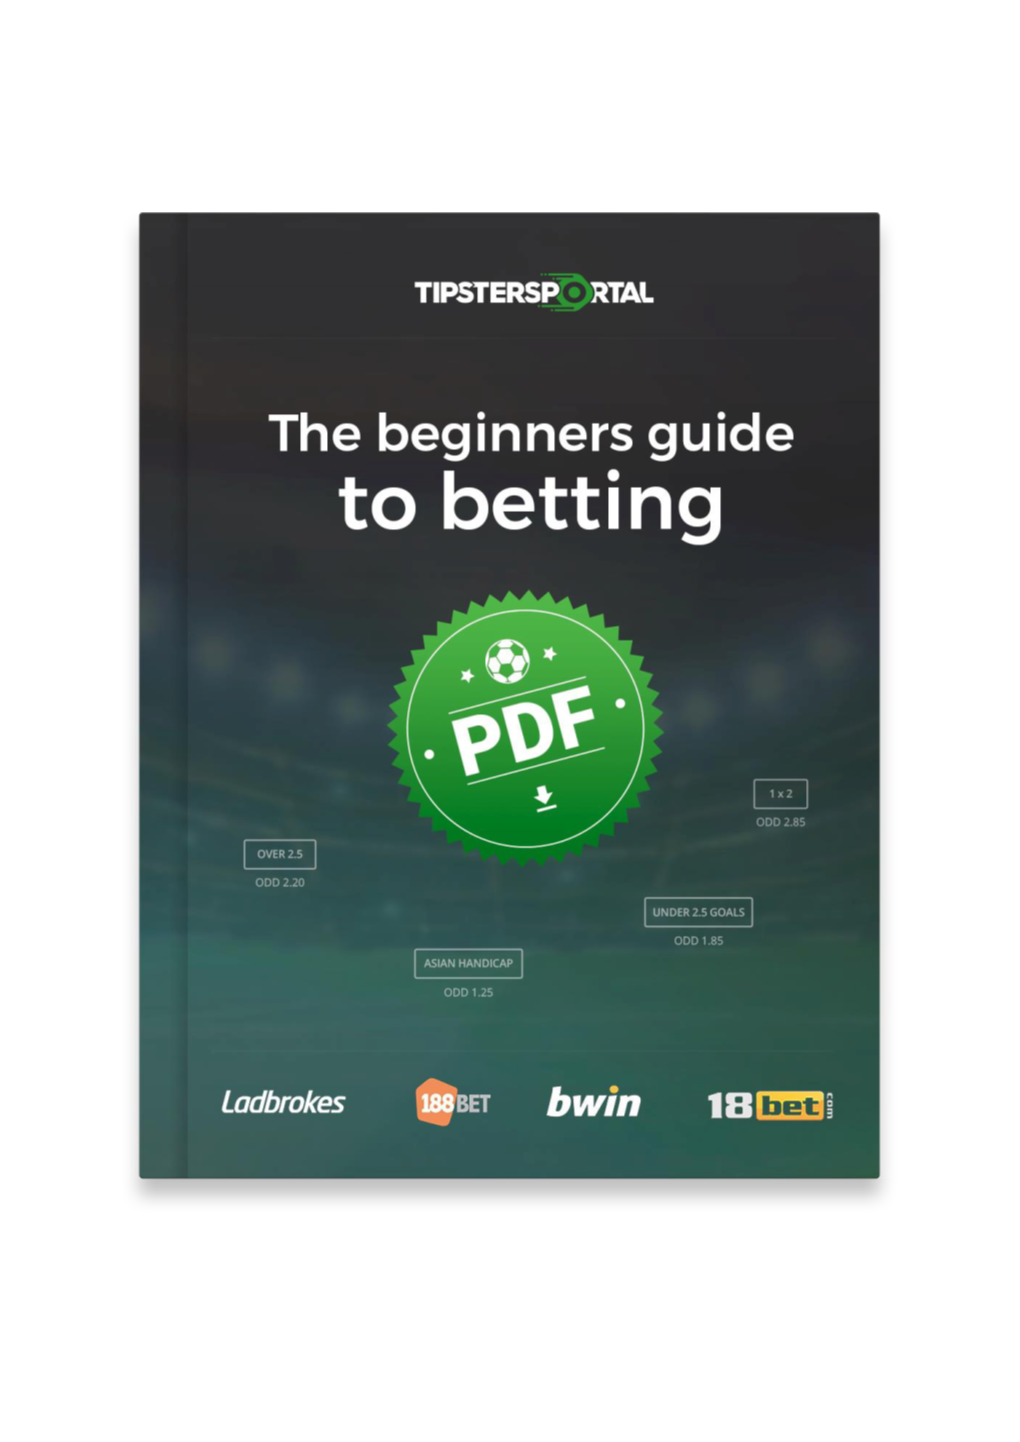 Betting Odds and How to Manage Your Bankroll, to the Various Types of Betting to Understanding Bookmakers to More Tips for Succeeding at Betting